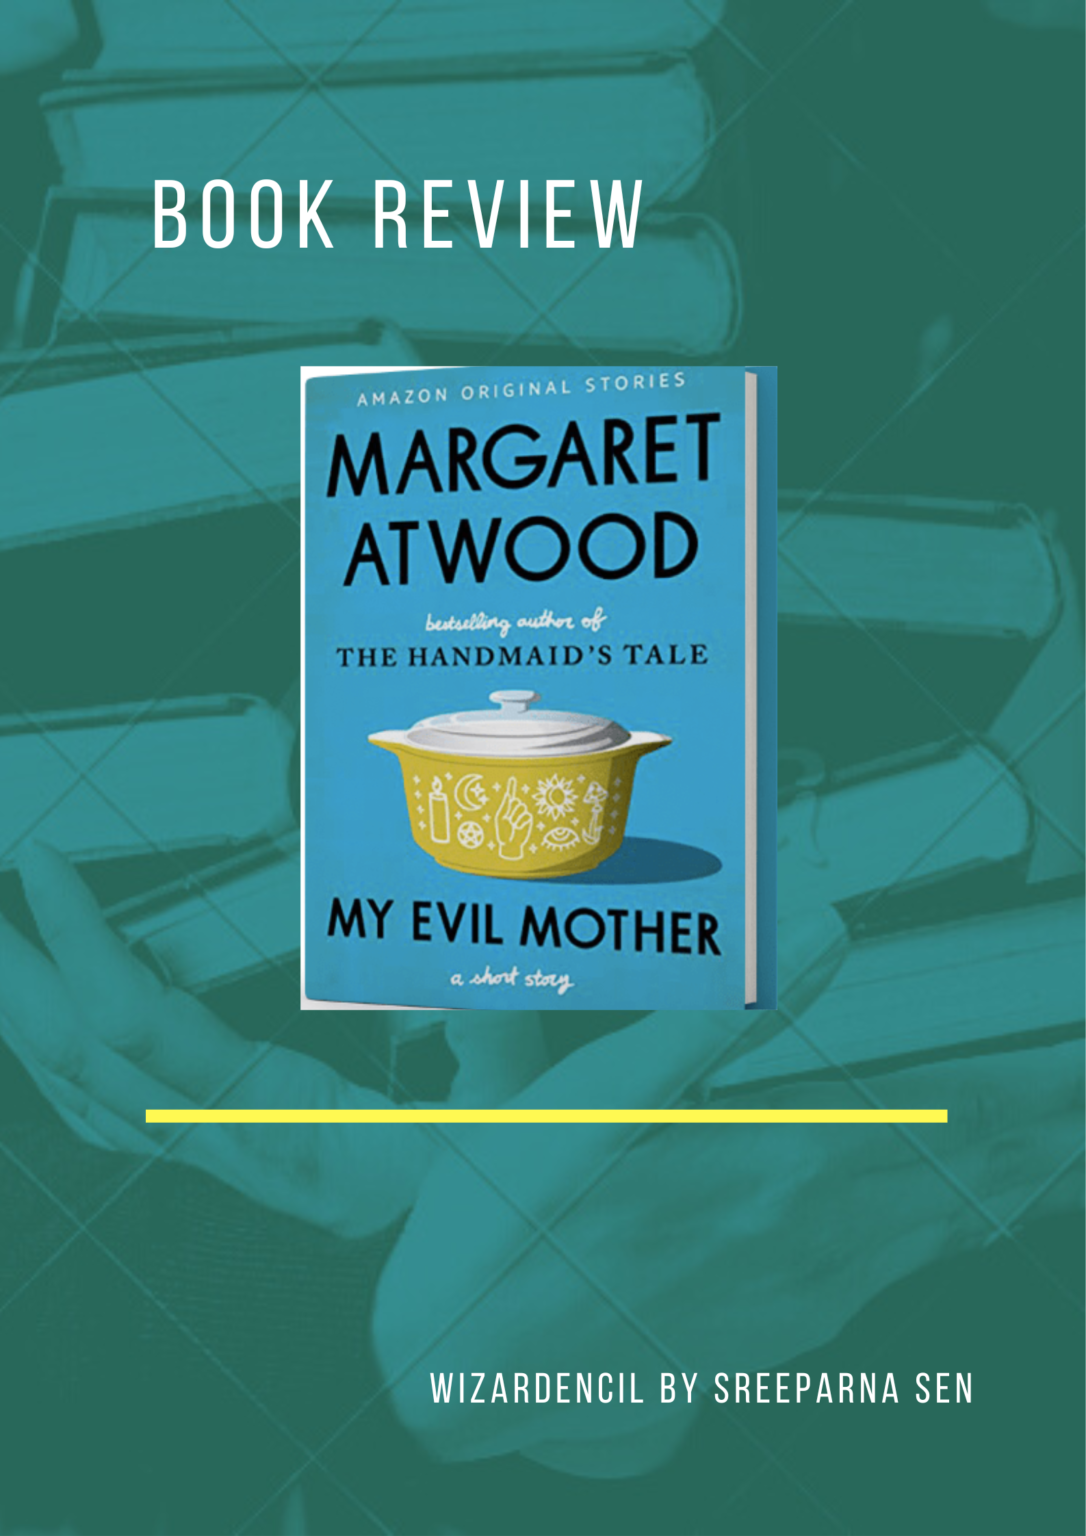 Book Review My Evil Mother by Margaret Atwood Wizardencil